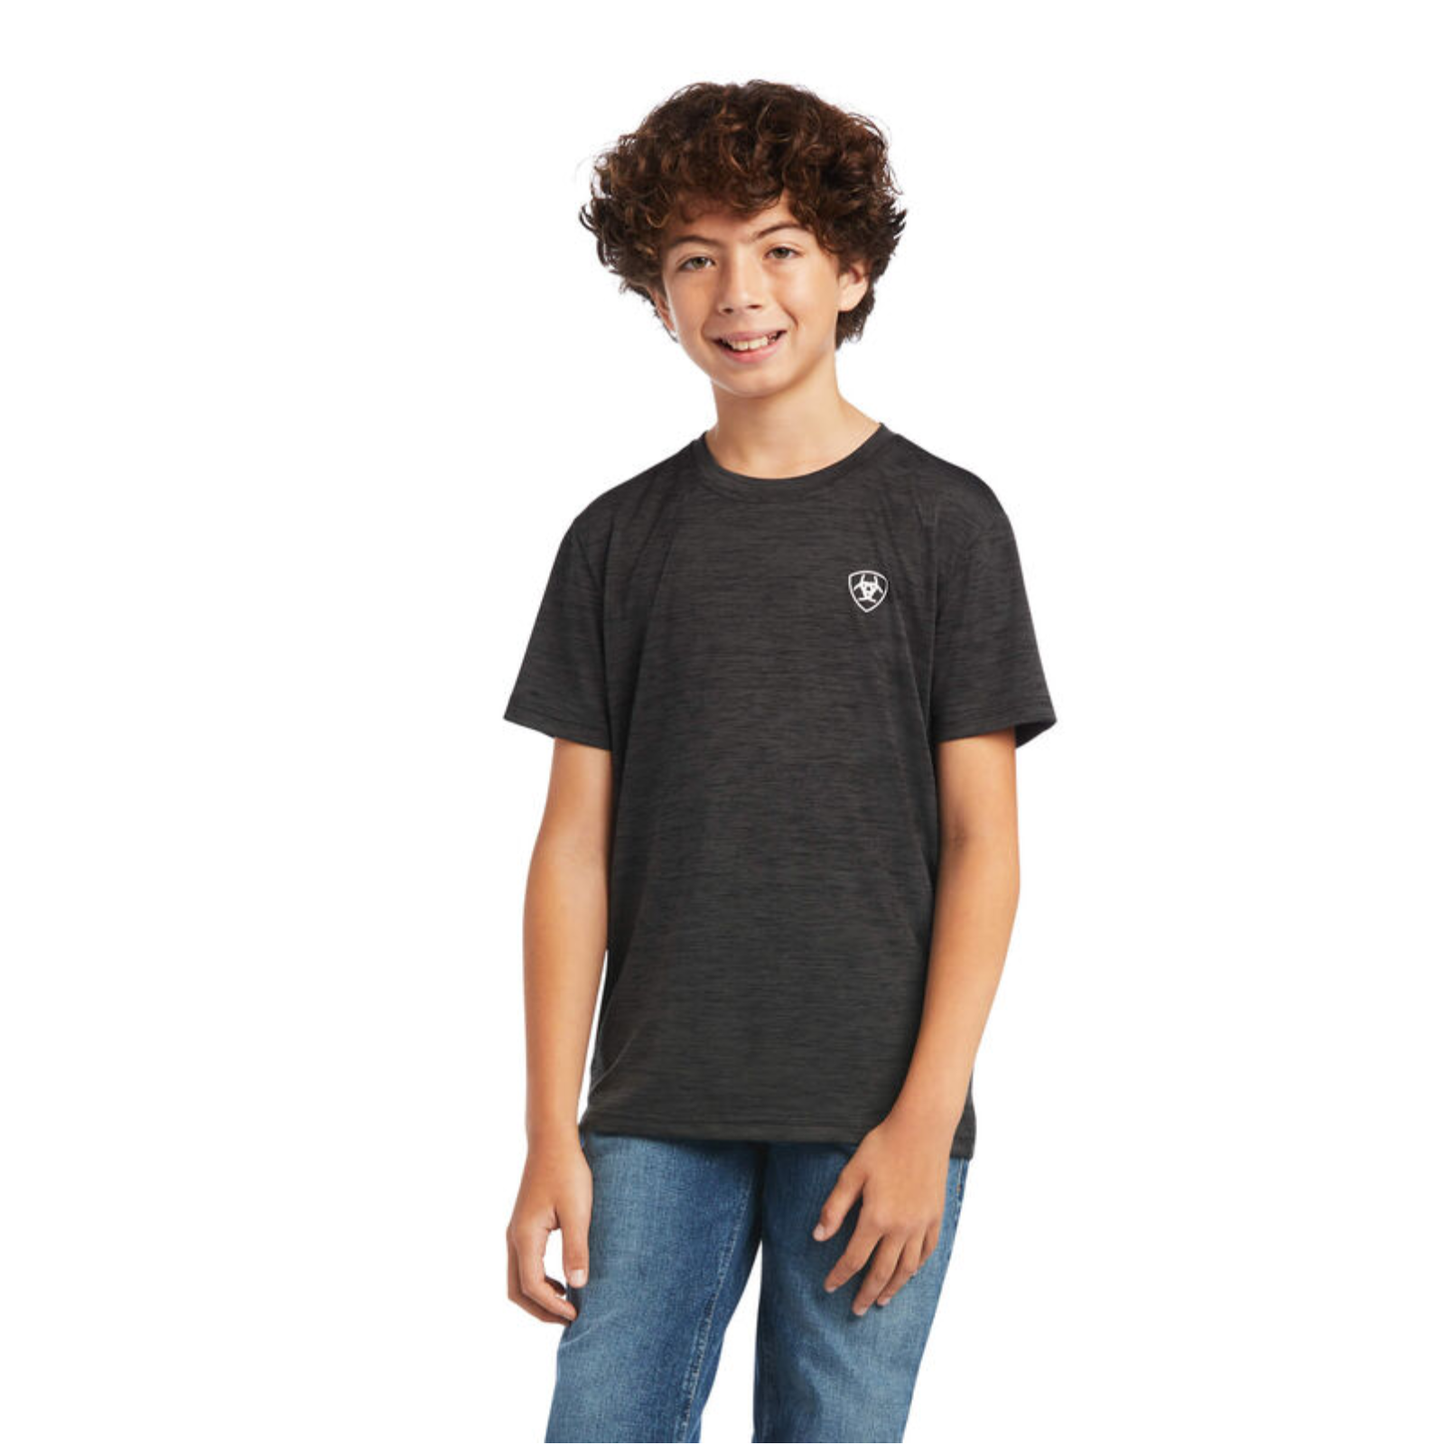 Ariat Children's Charger Patriotic Charcoal Graphic T-shirt 10040635